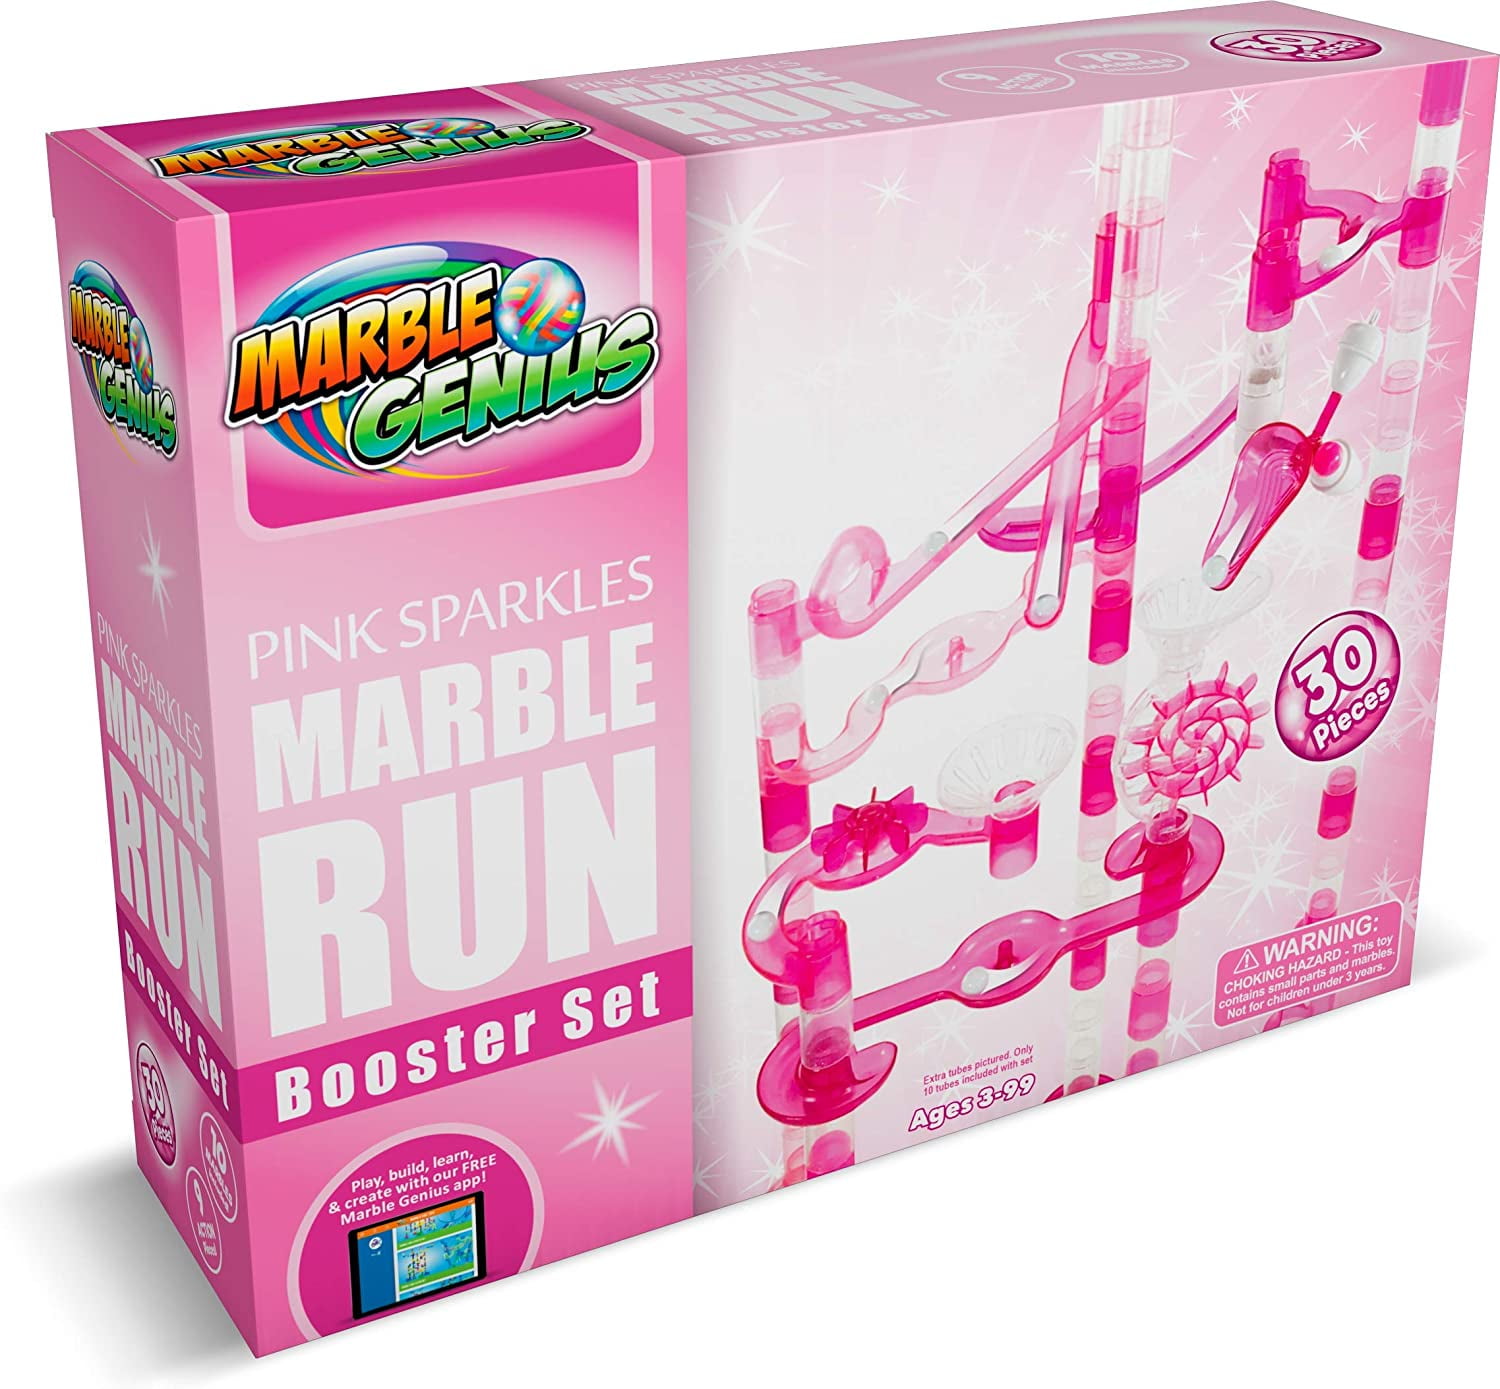 Marble Genius Booster Set Add-On Set - 20 Marbulous Marble Run Toy Pieces 